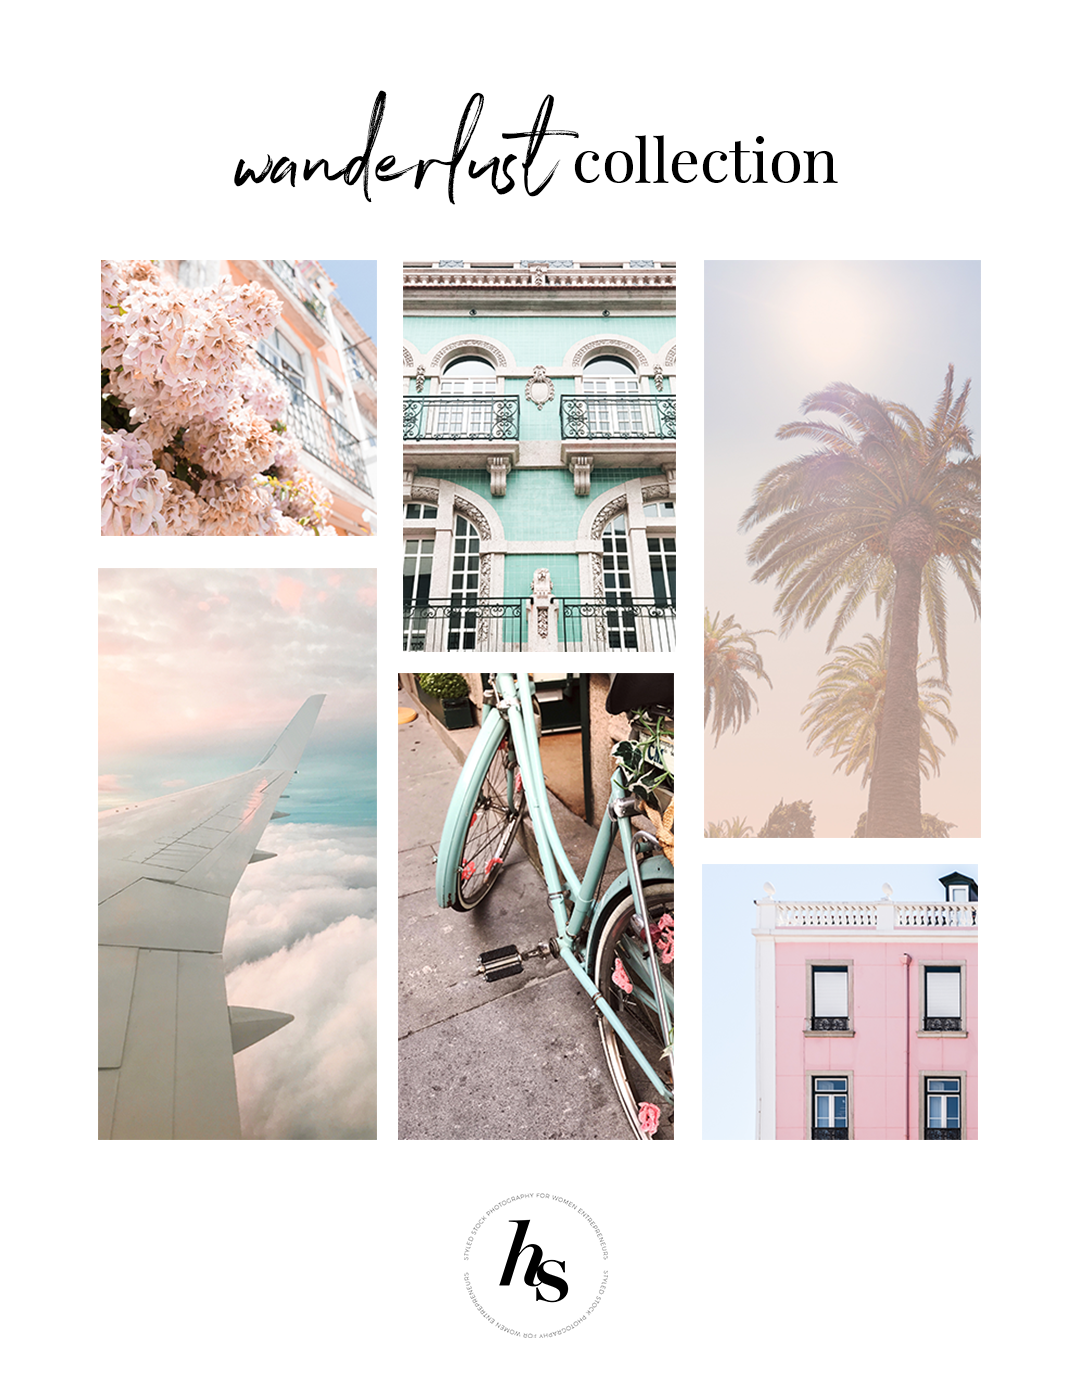 Haute Stock's Wanderlust collection has the perfect dreamy travel inspired stock photos for lifestyle brands. You'll want to see the full preview of the collection here!